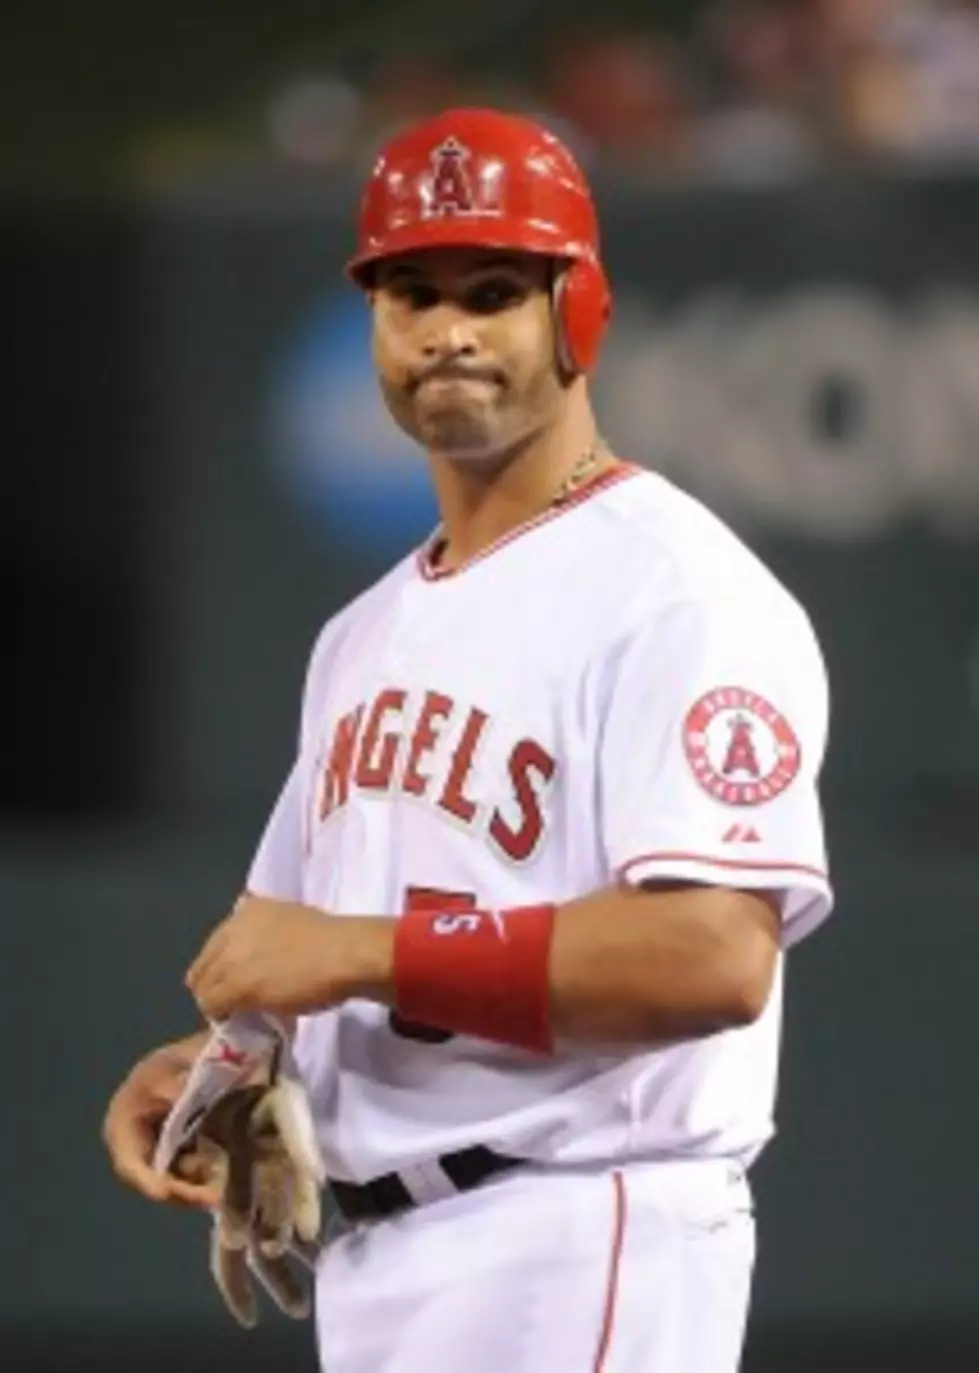 Are you happy that Pujols is having a terrible year? [POLL]